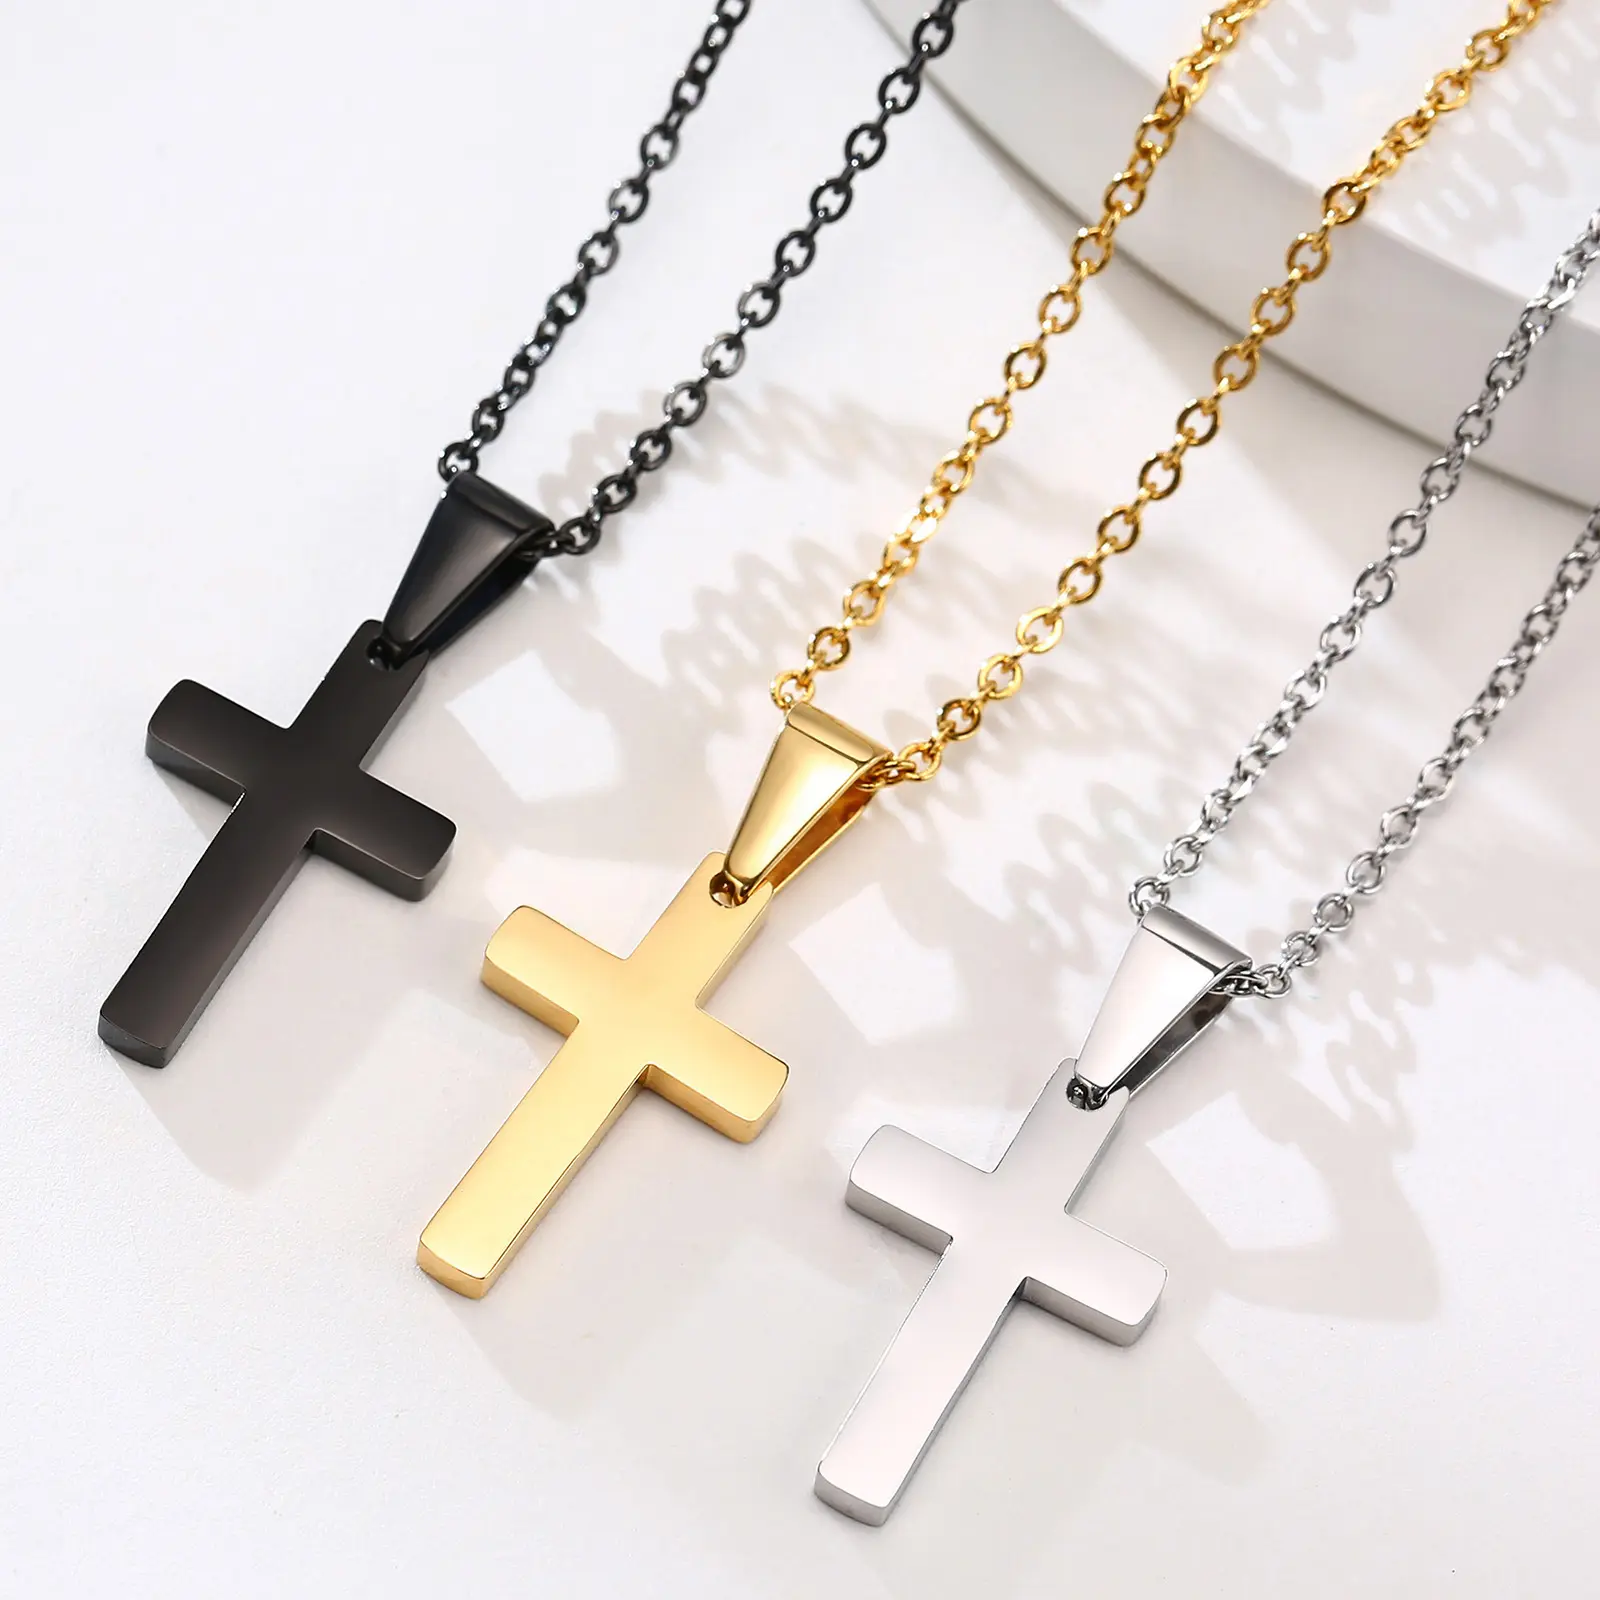 Cross Necklace Faith Pendant 14K Plated Chain Stainless Steel Silver/Gold Plain Pendant Cross Necklace Prayer Religious Jewel